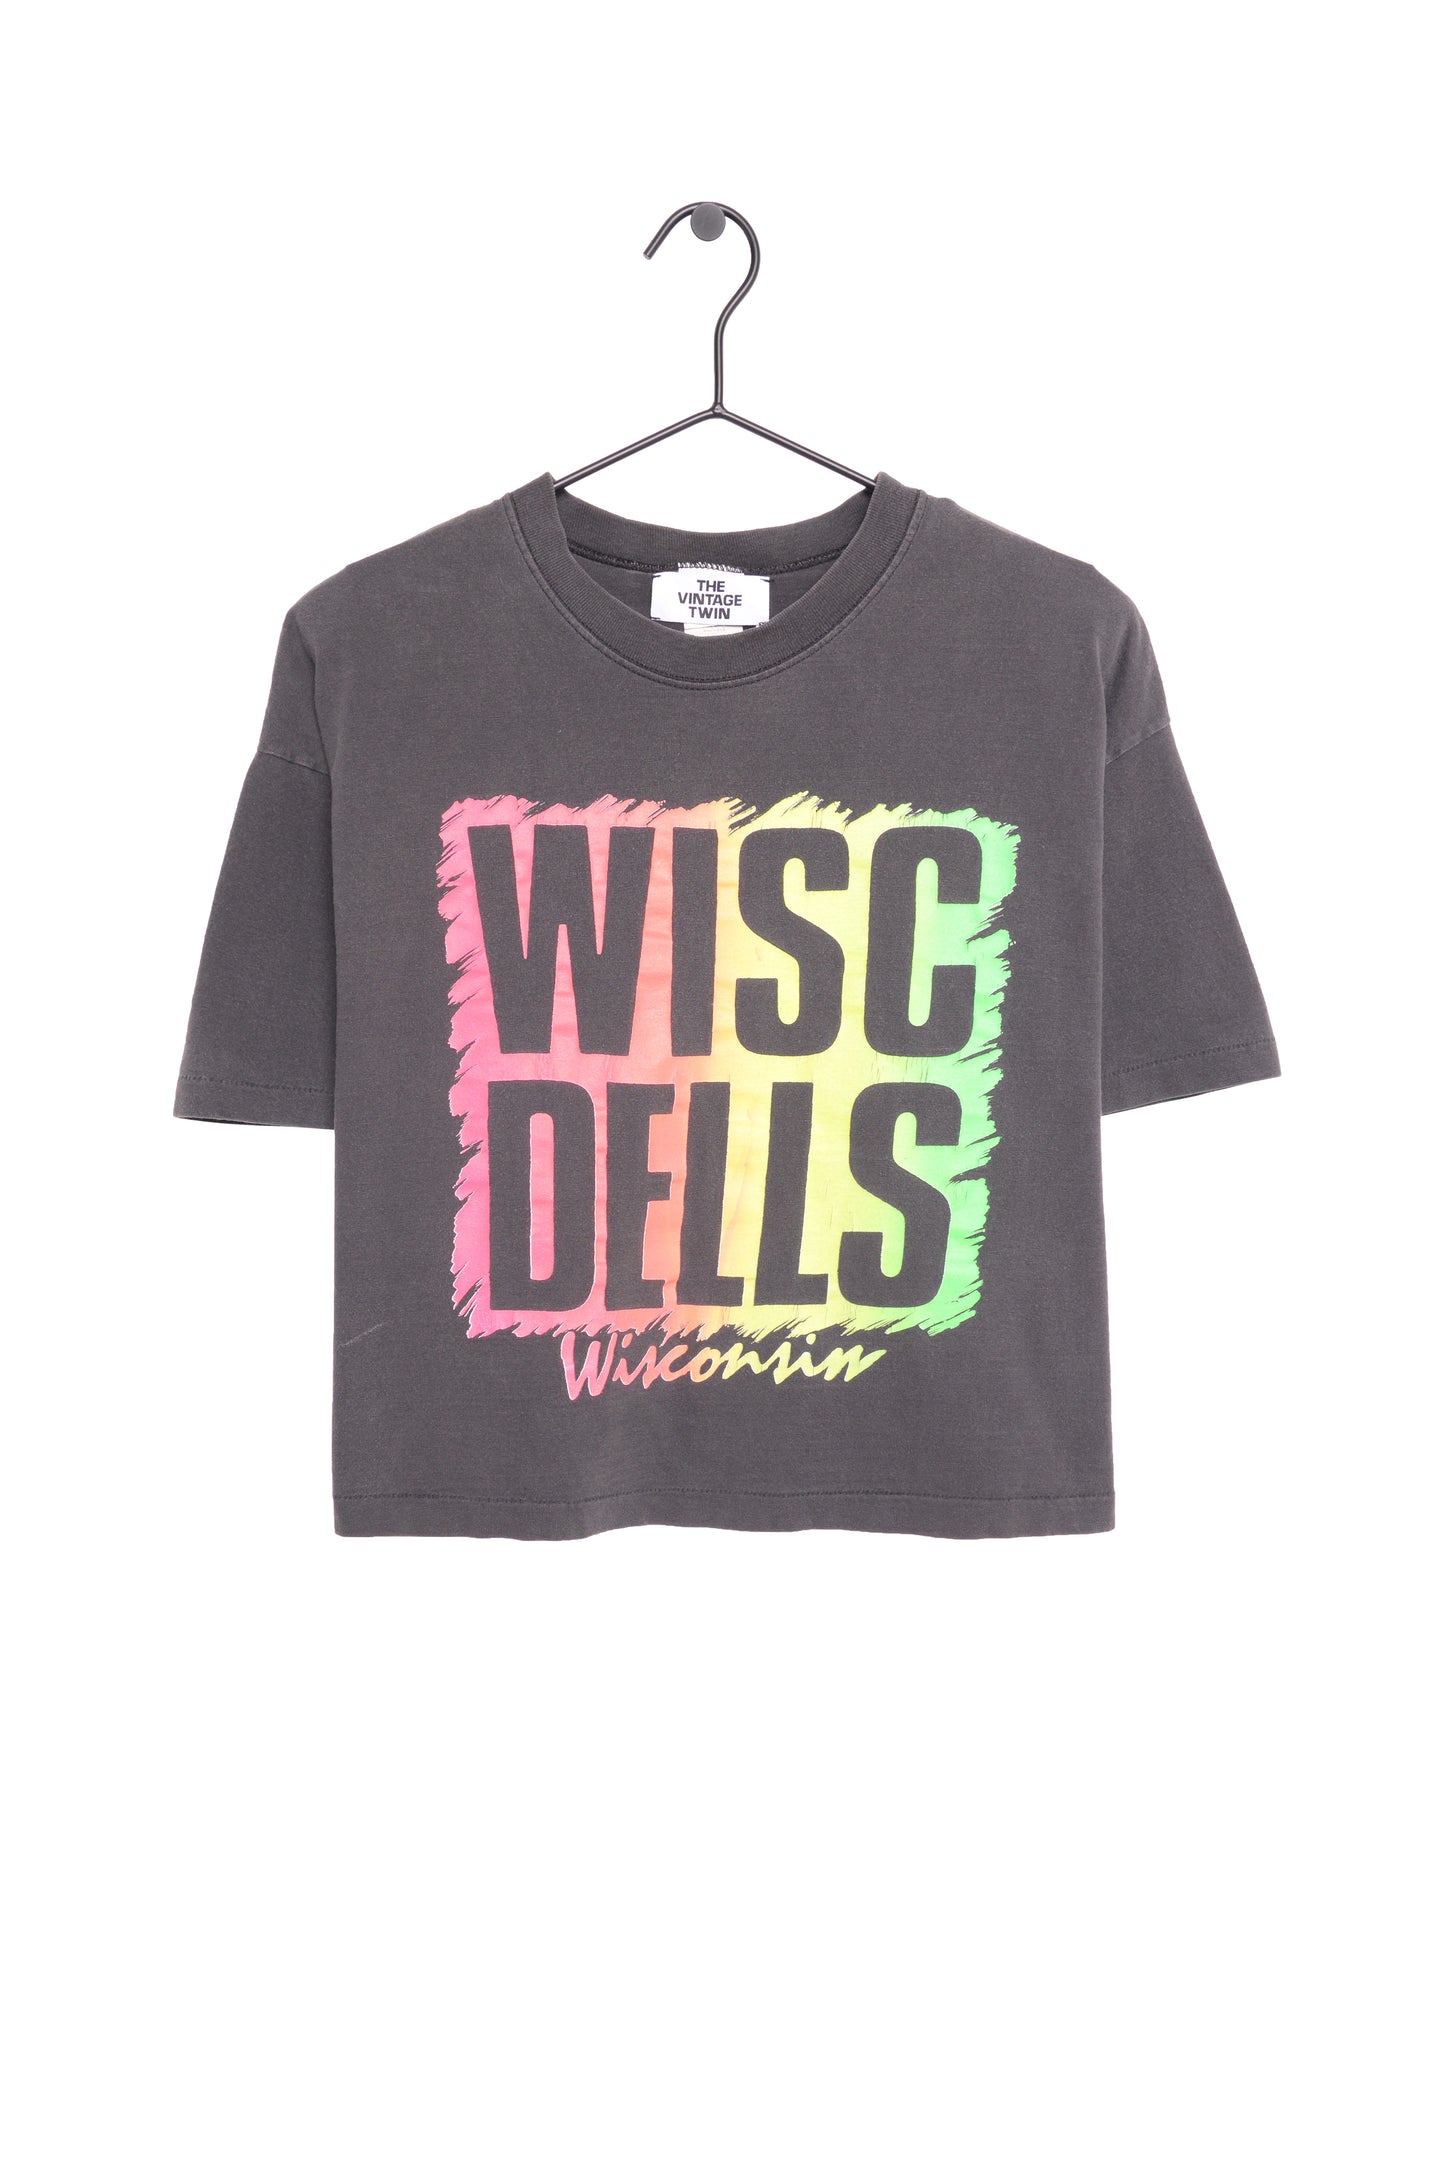 1980s Faded Wisconsin Dells Cropped Tee